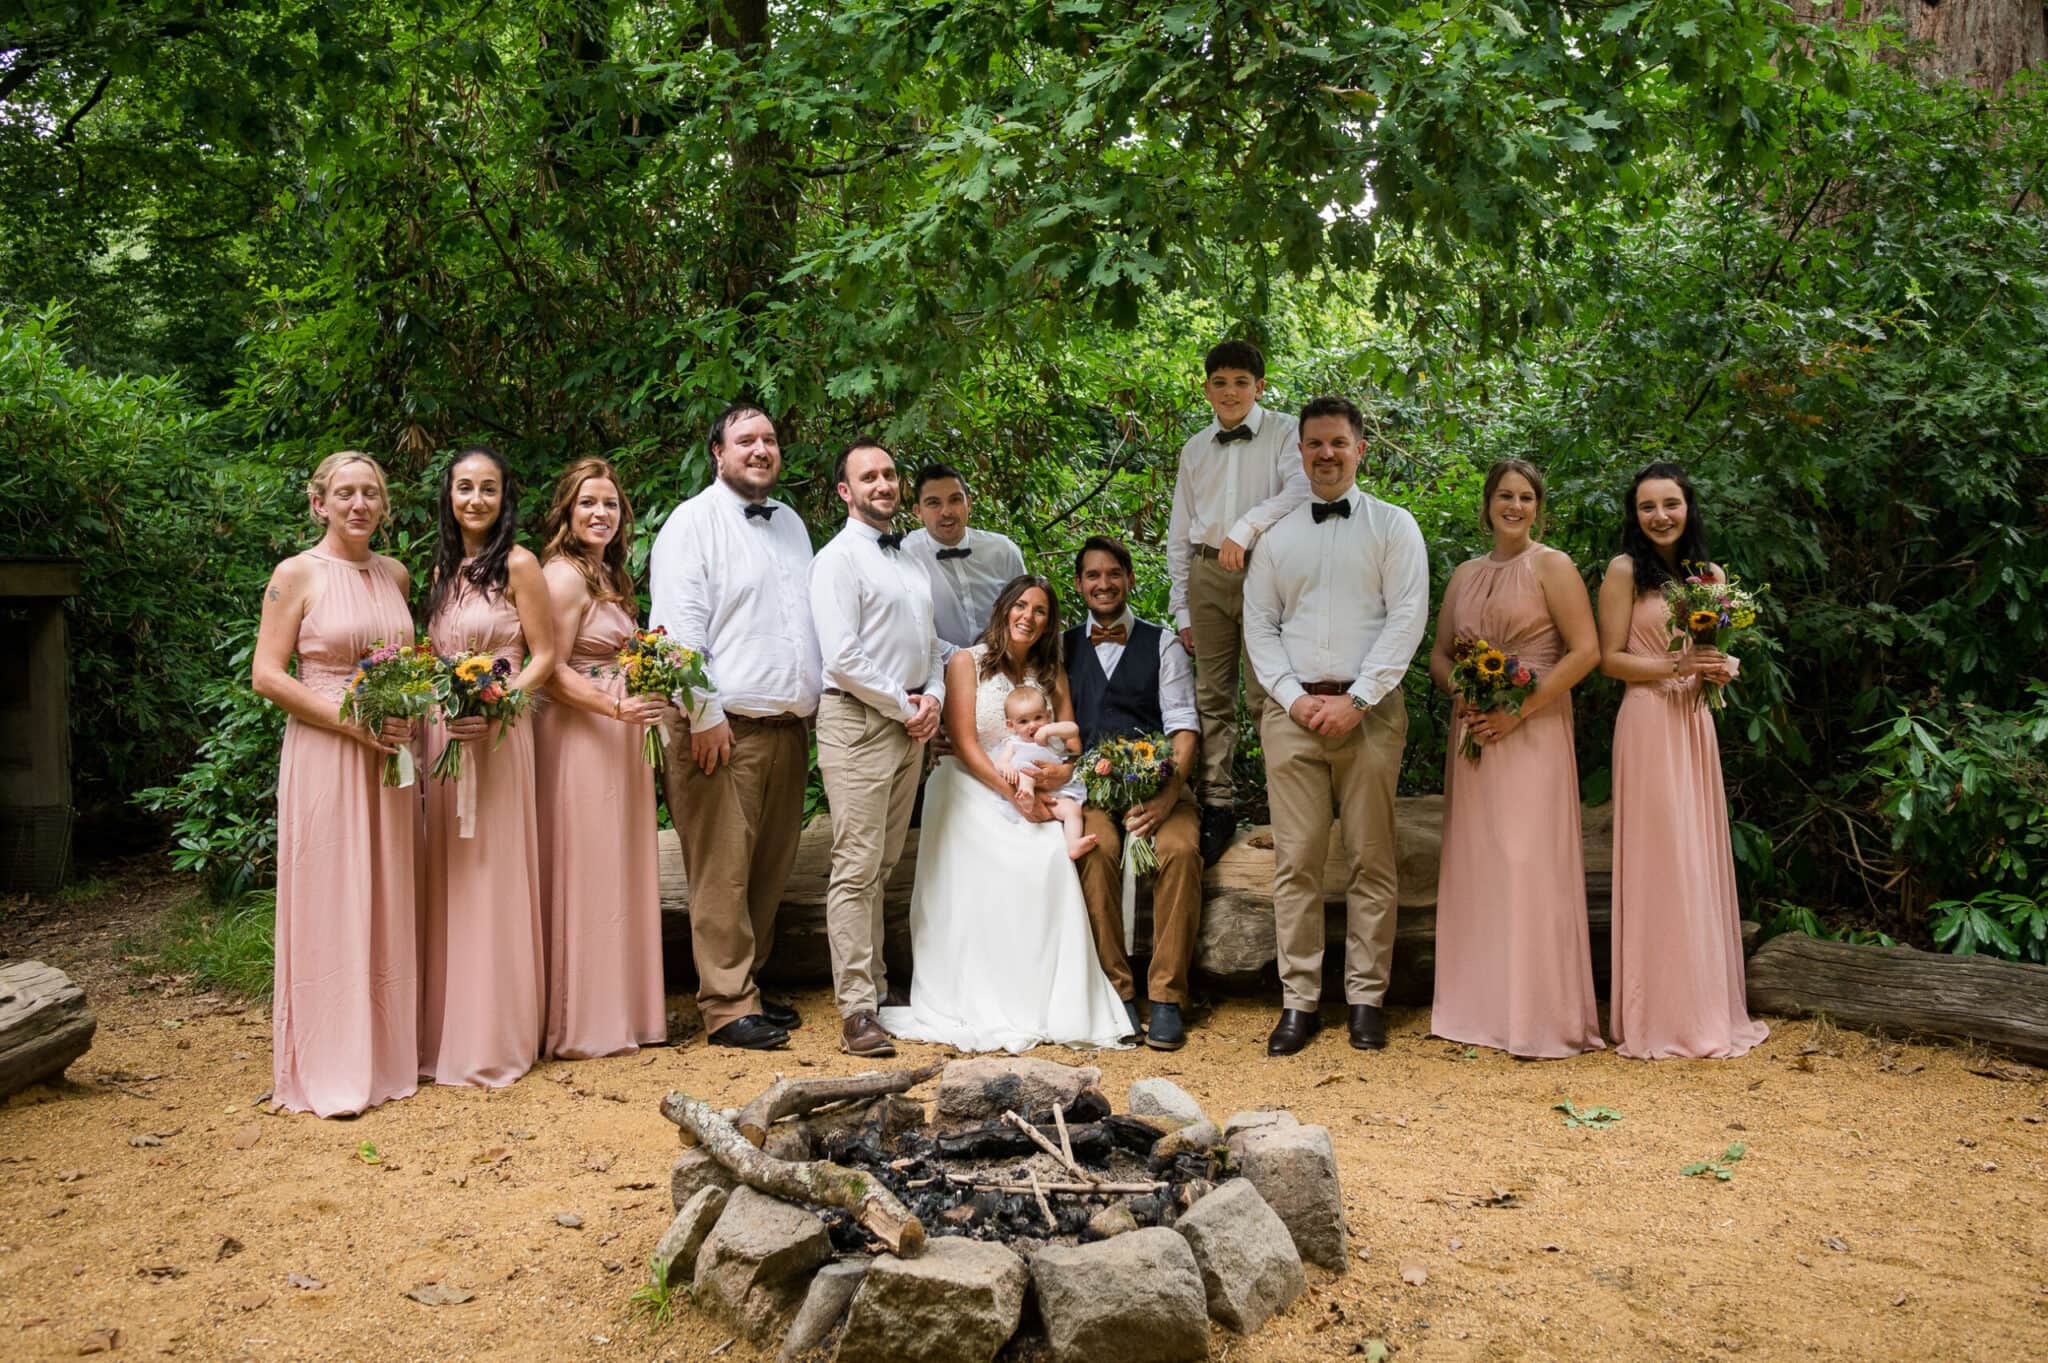 Relaxed bridal group photo in the woodland